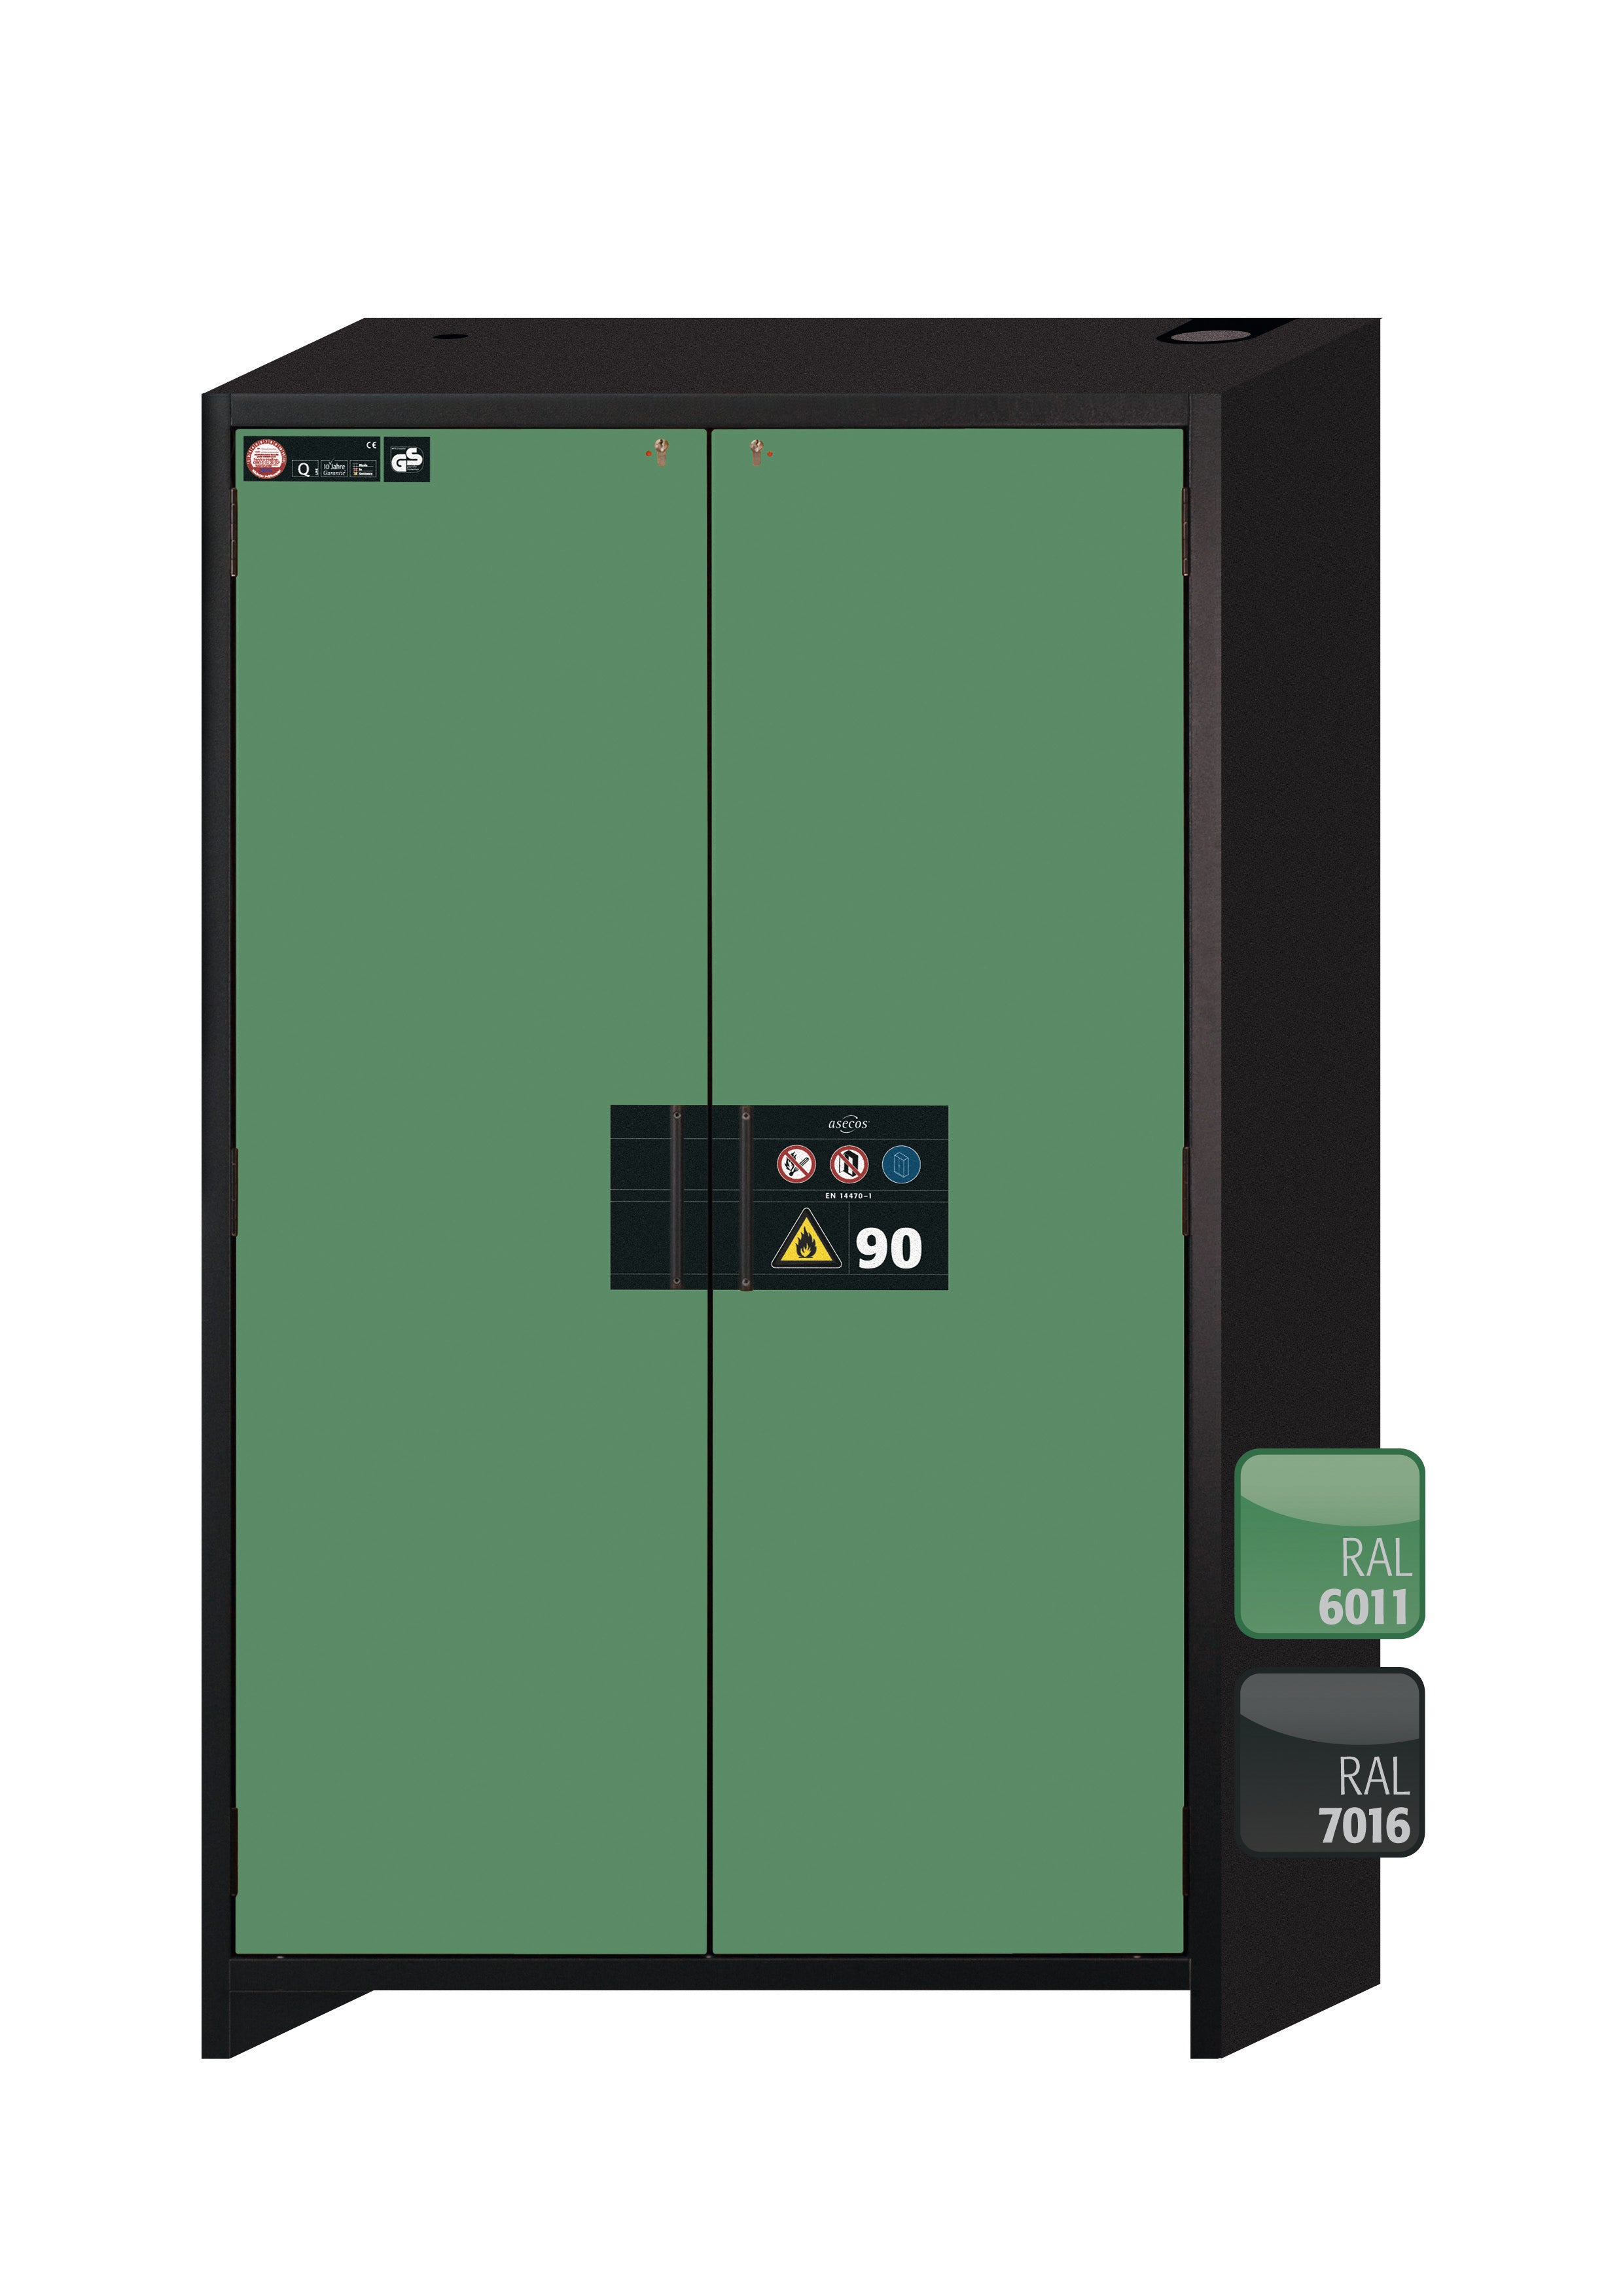 Type 90 safety storage cabinet Q-CLASSIC-90 model Q90.195.120 in reseda green RAL 6011 with 2x drawer (standard) (sheet steel),